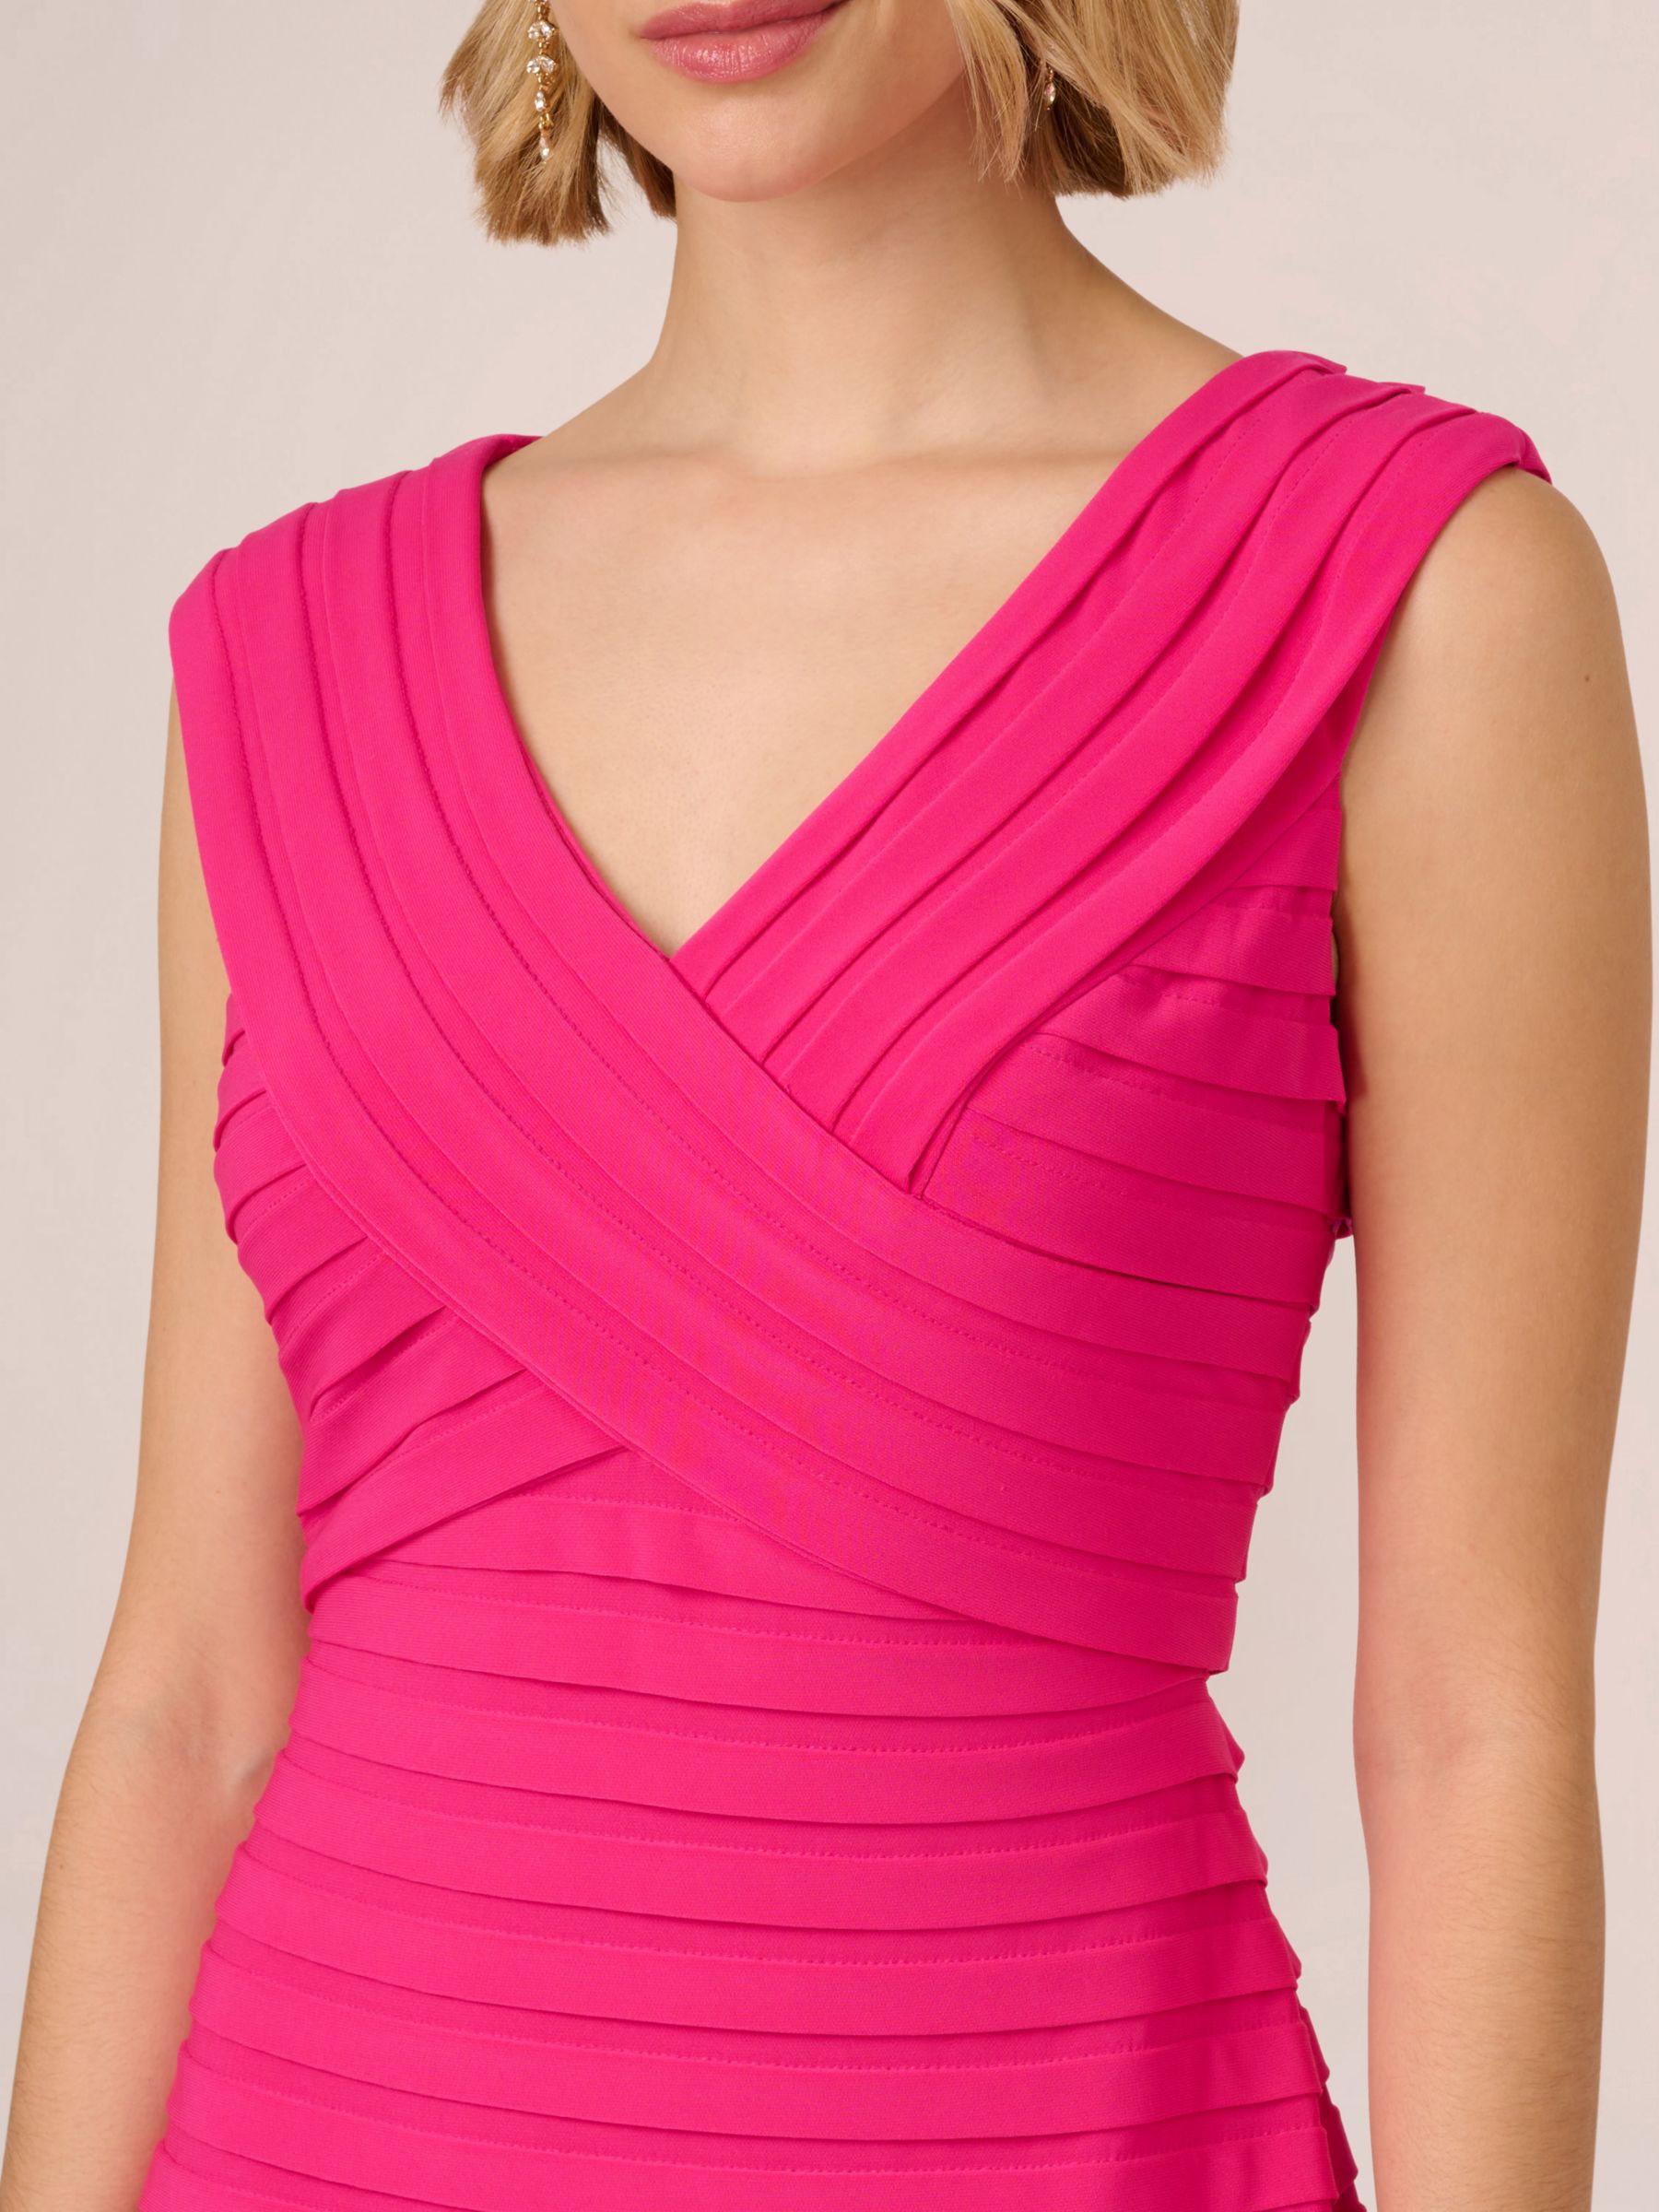 Adrianna Papell Banded Jersey Dress, Electric Pink, 6